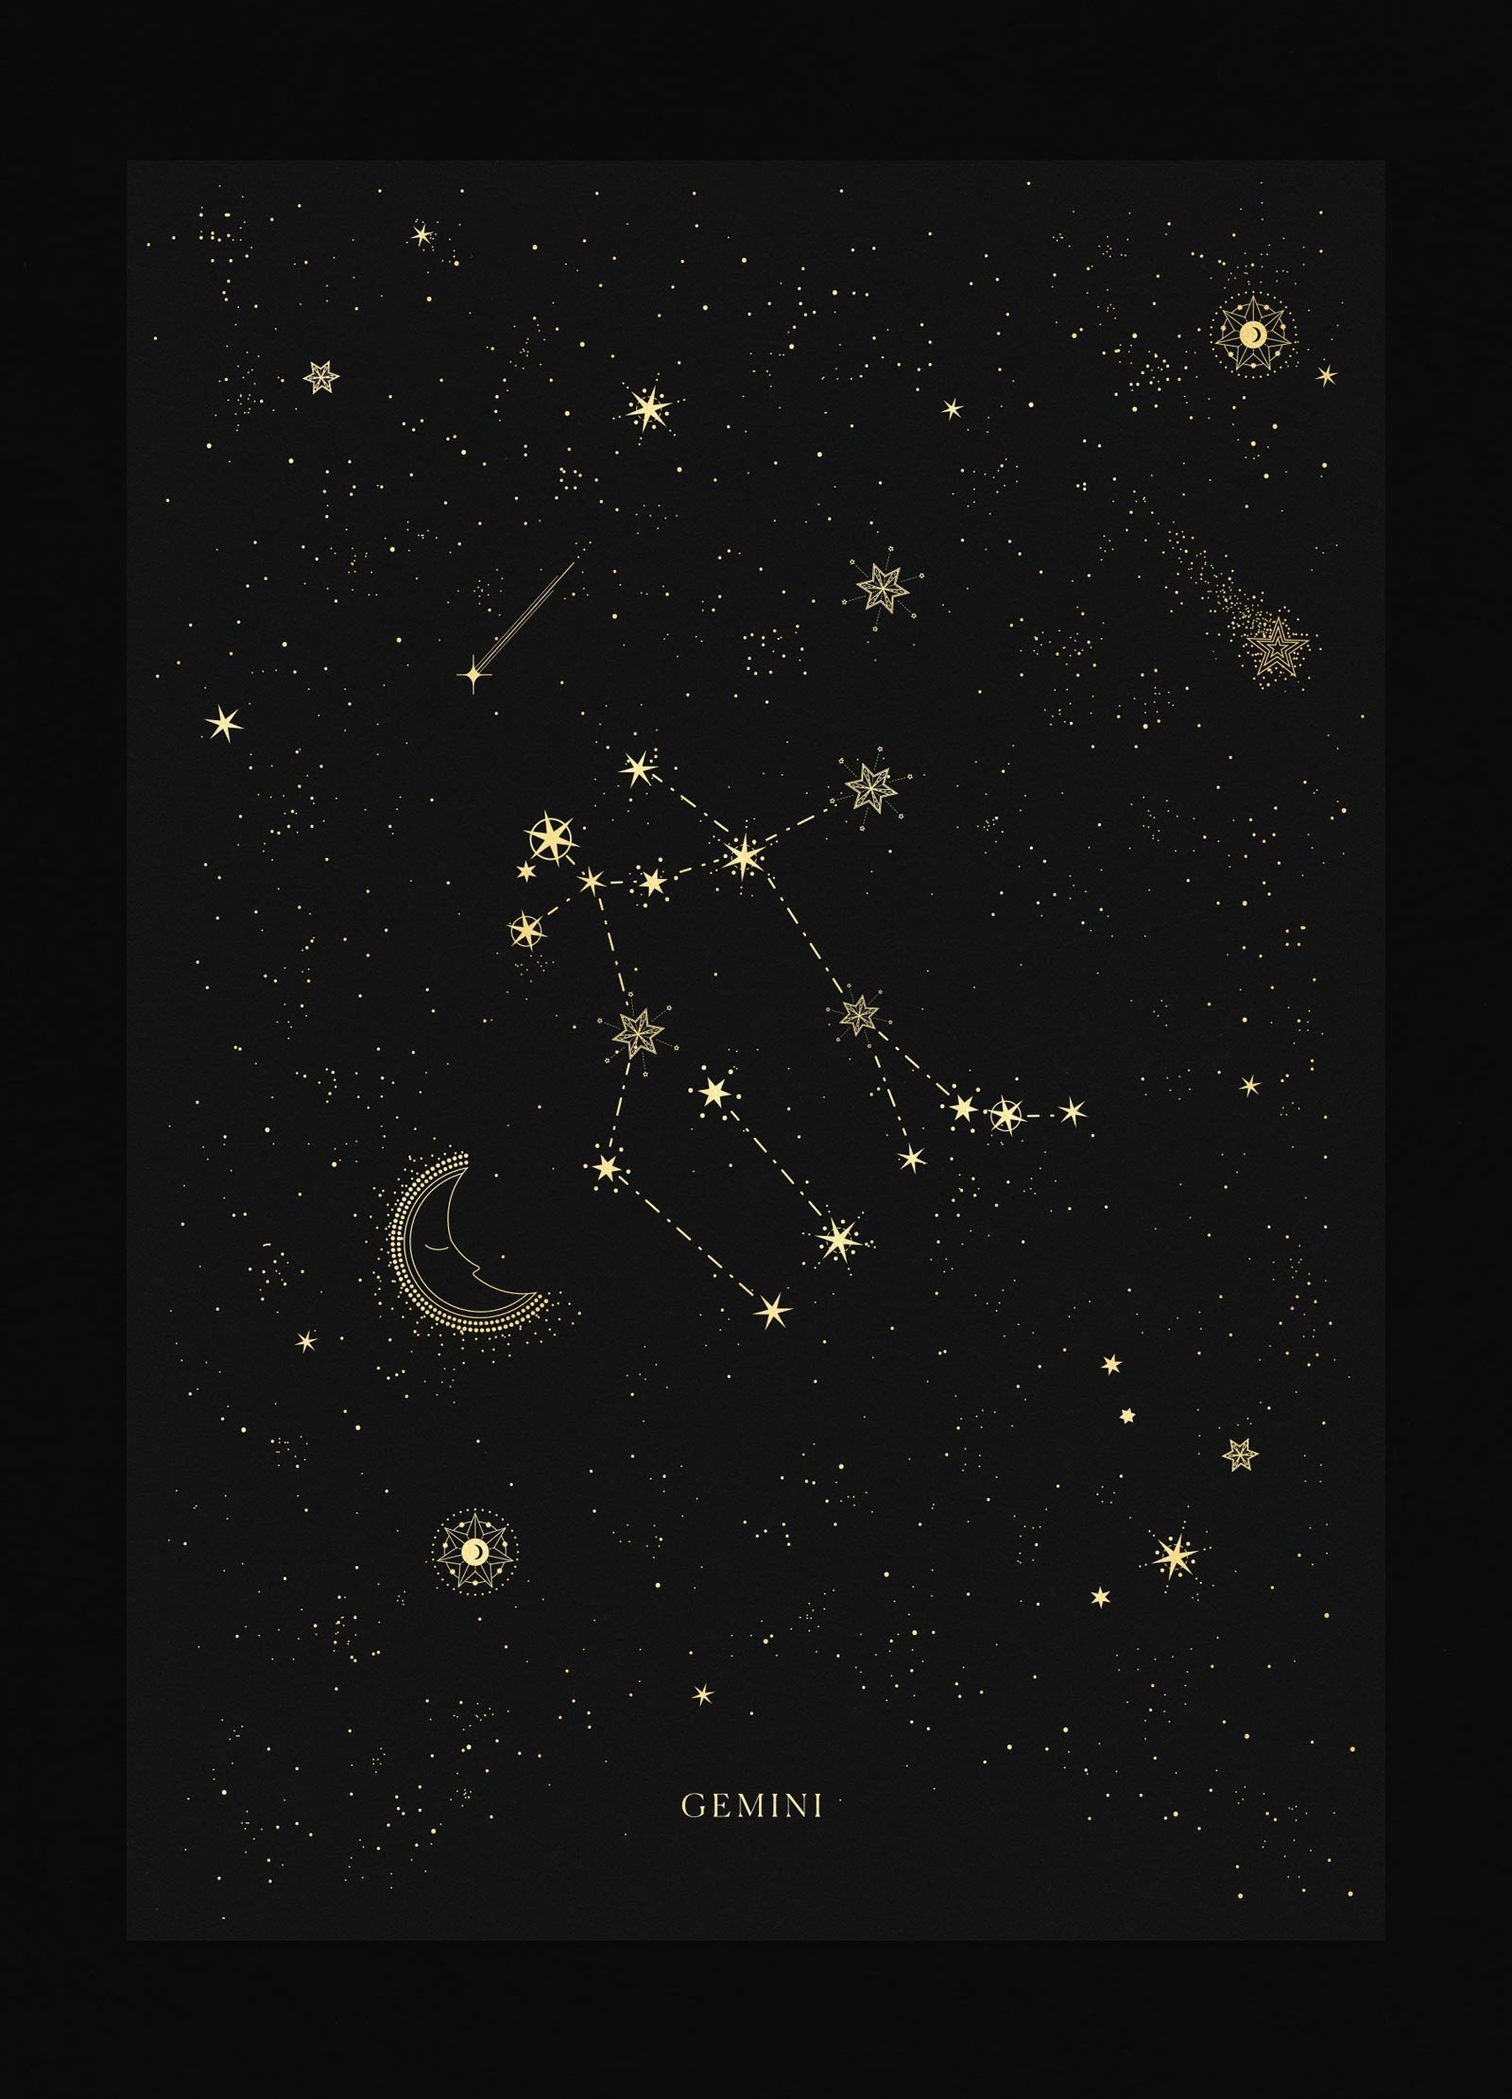 Zodiac Constellation Wallpapers Wallpaper Cave